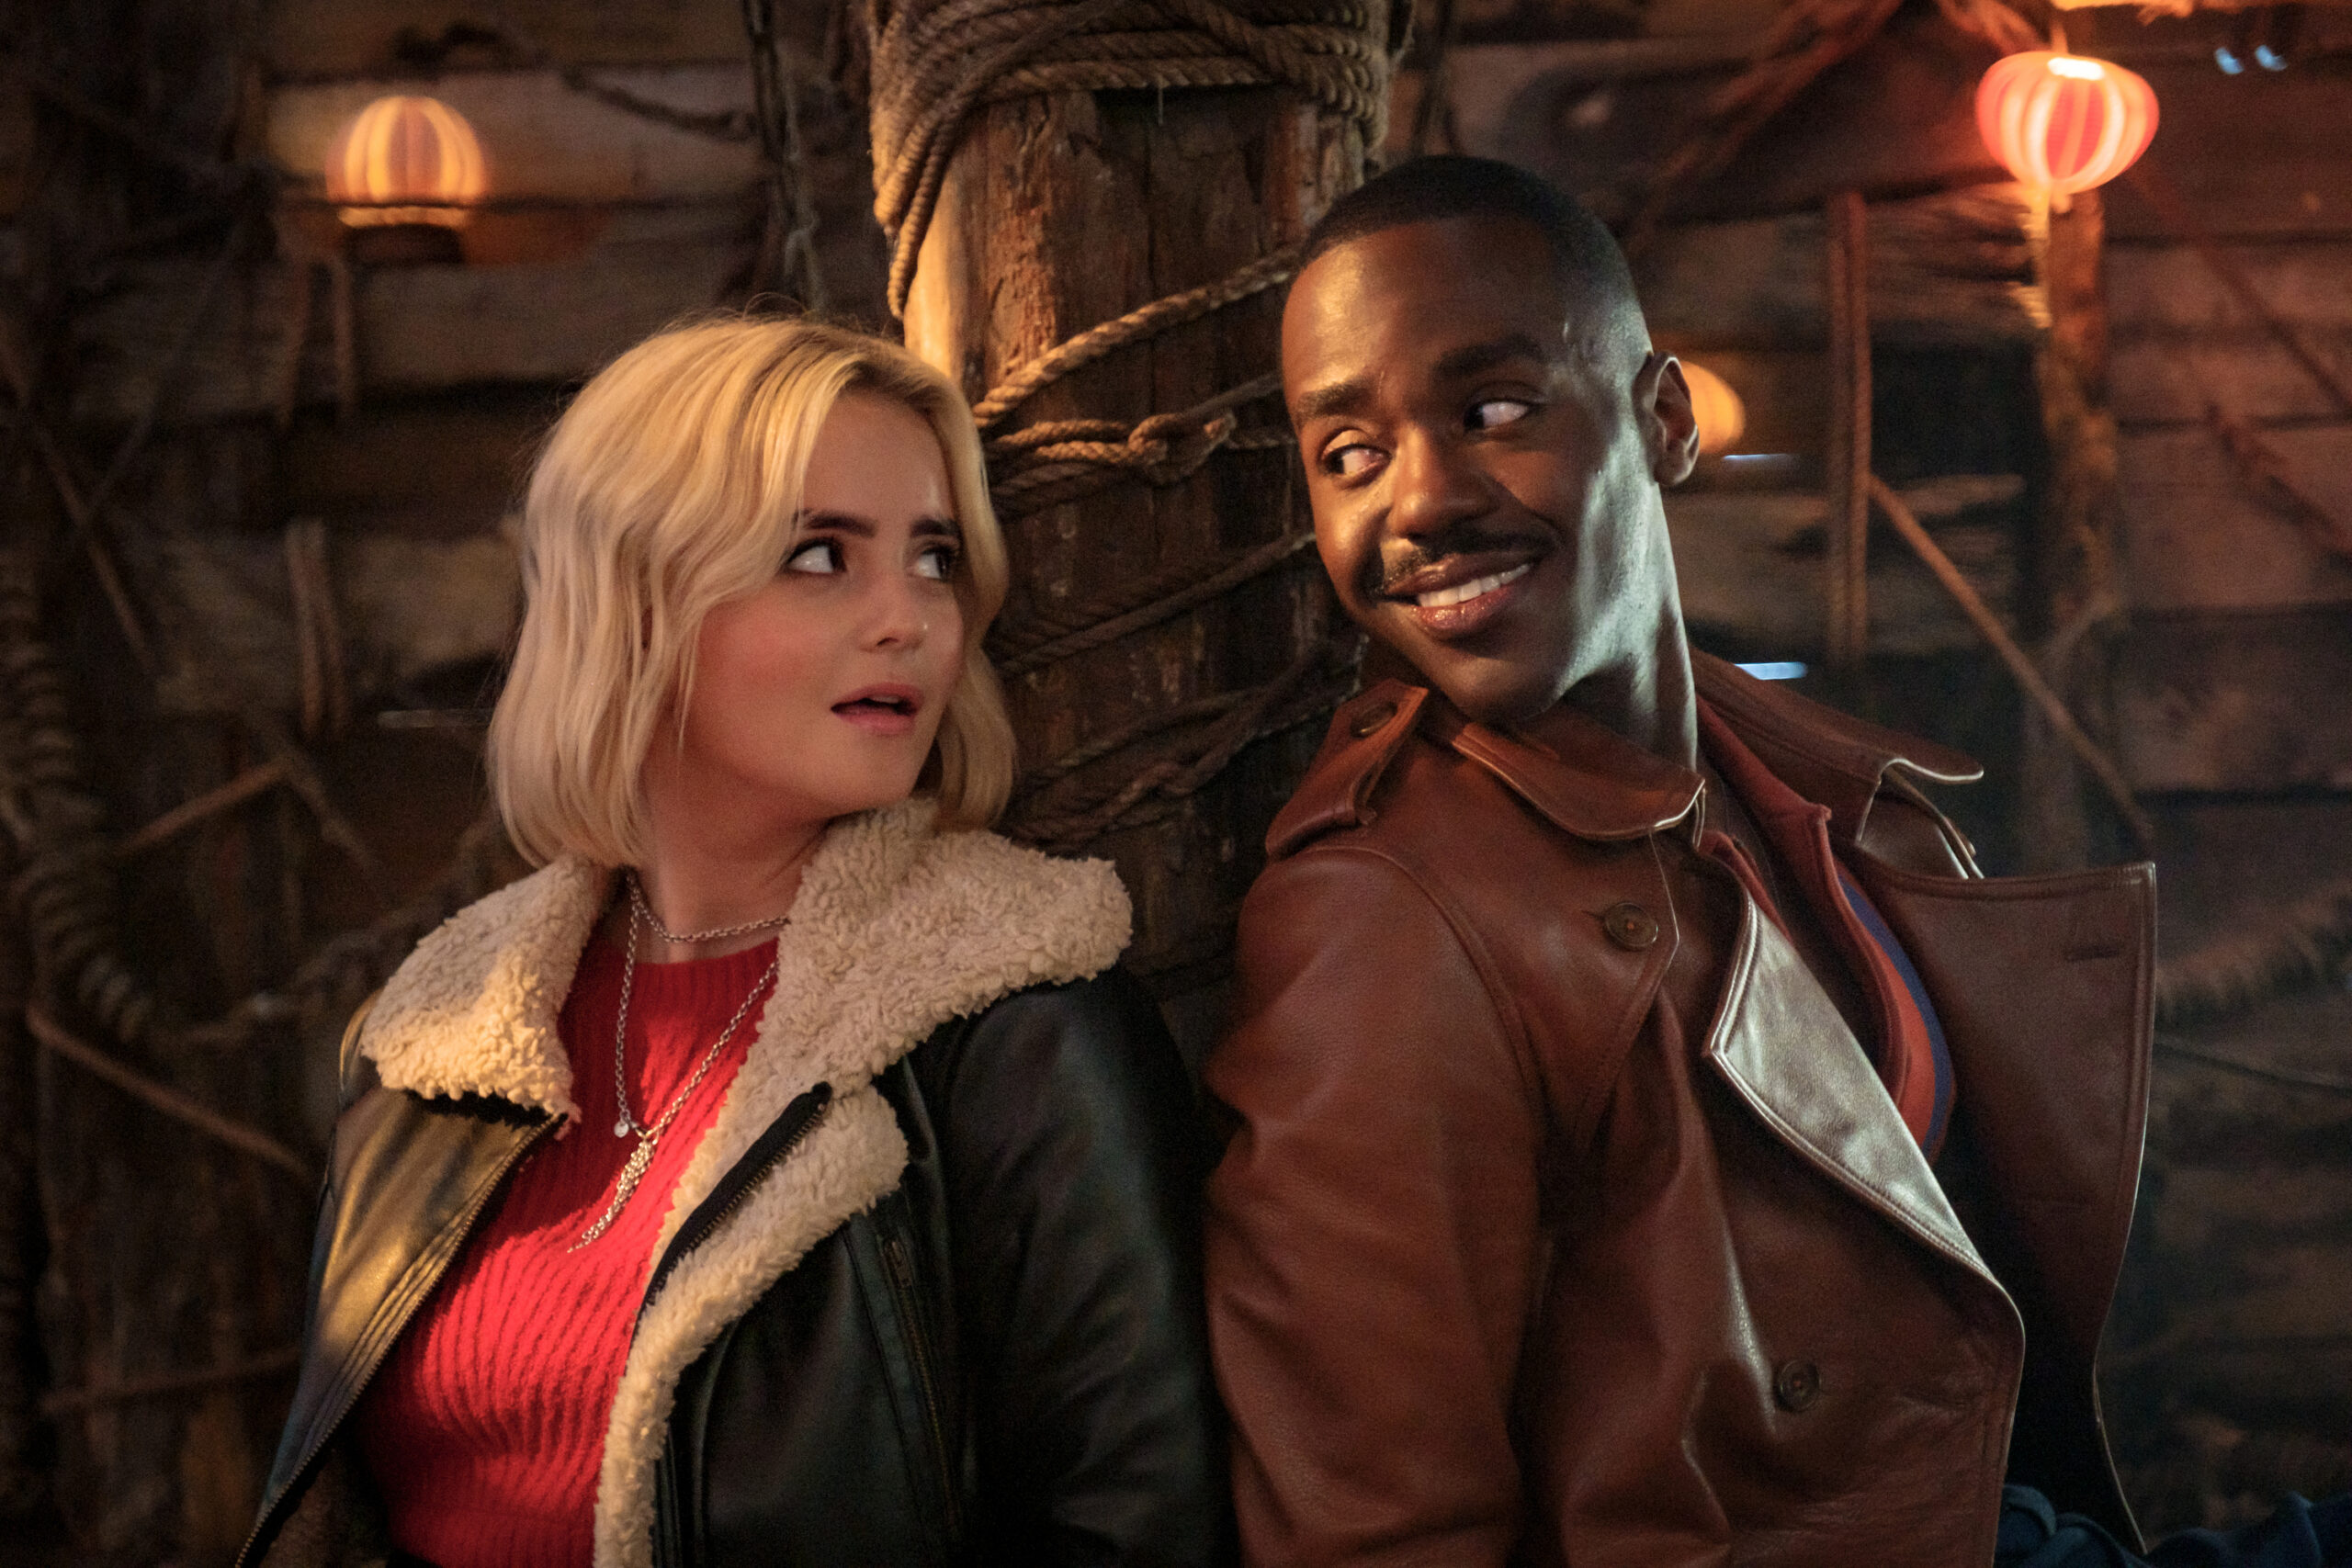 Doctor Who Christmas Special Teaser Trailer Debuts Ncuti Gatwa and Millie Gibson in Next Chapter of Franchise